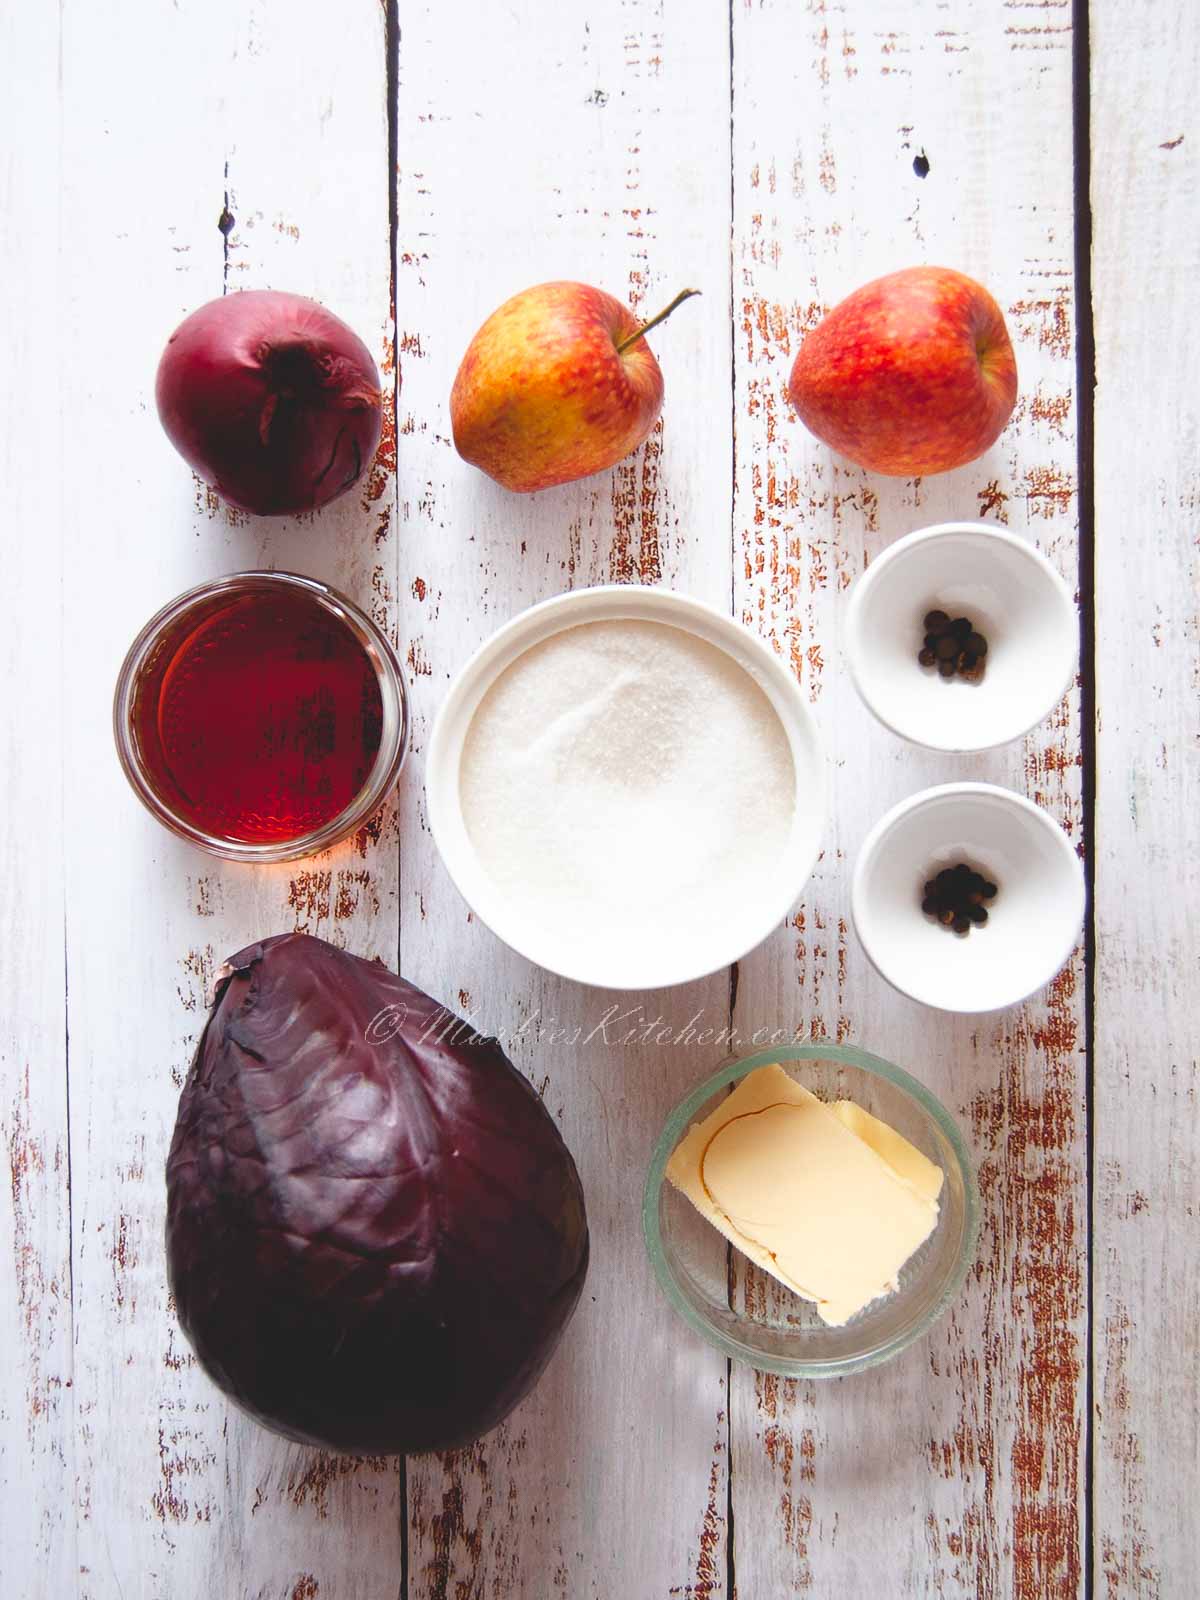 A top-down photo of ingredients laying on a table: two apples, a red onion, a bowl of sugar, a bowl of red wine vinegar, two pinch bowls of spices, a knob of butter and a bulb of red cabbage.